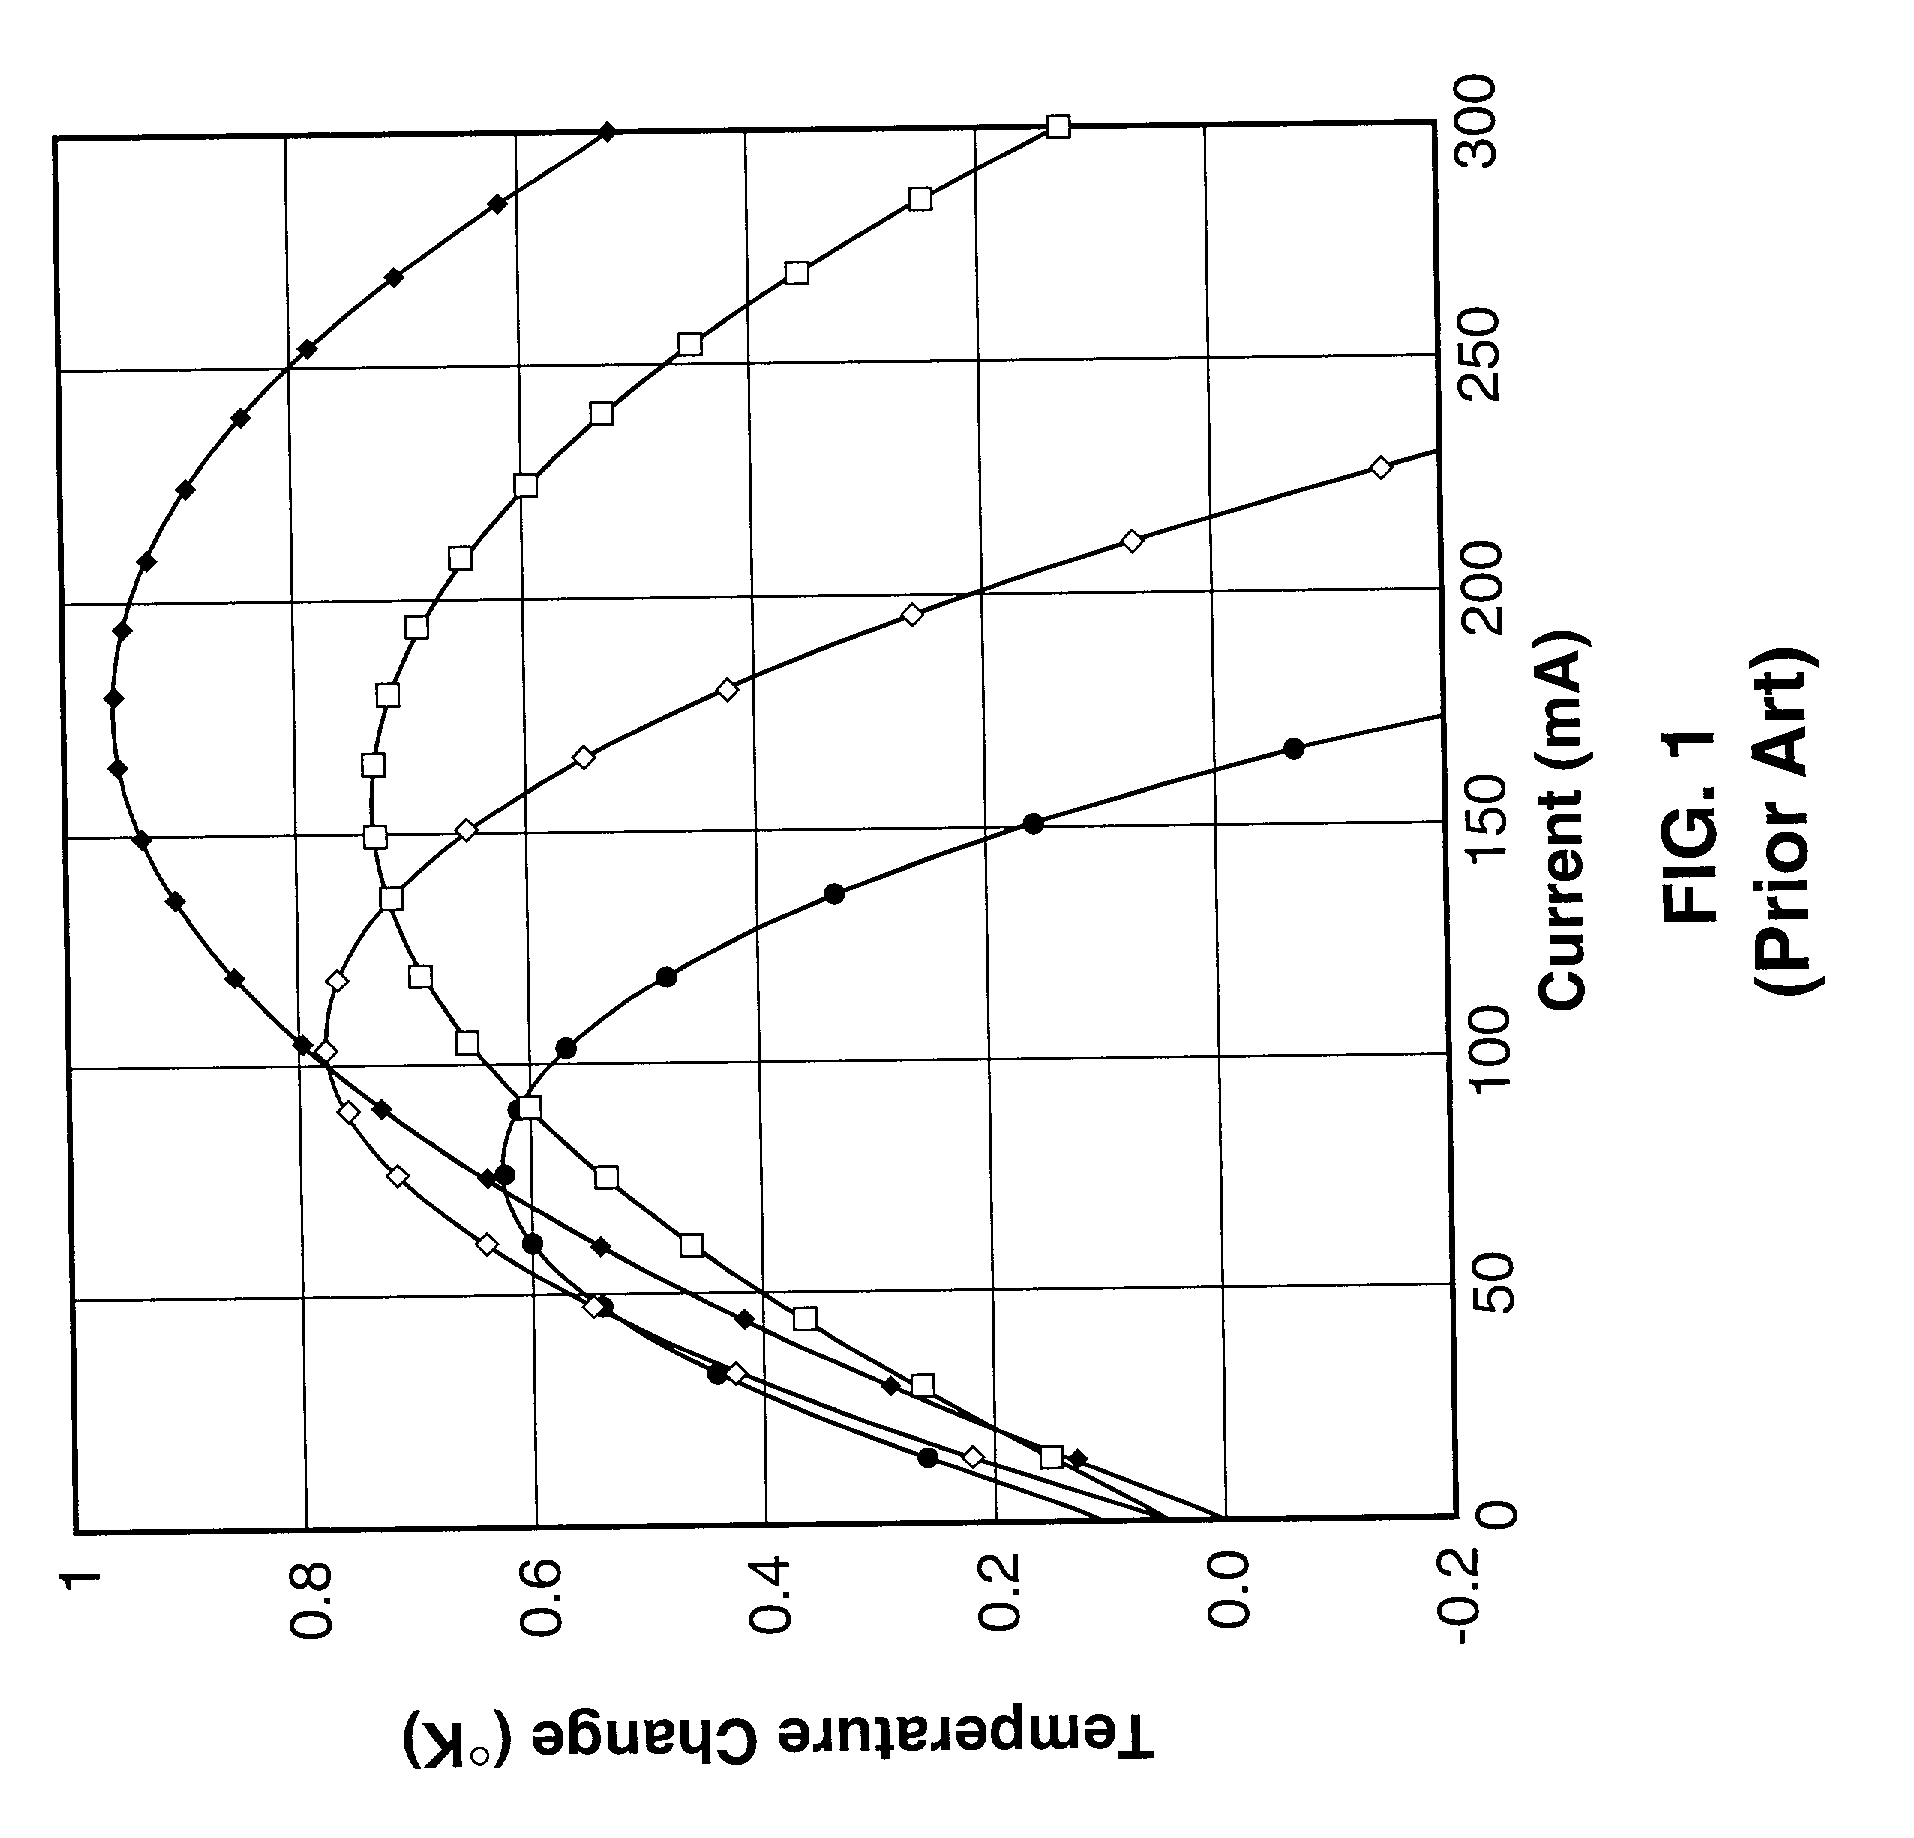 Submicron thermal imaging method and enhanced resolution (super-resolved) AC-coupled imaging for thermal inspection of integrated circuits